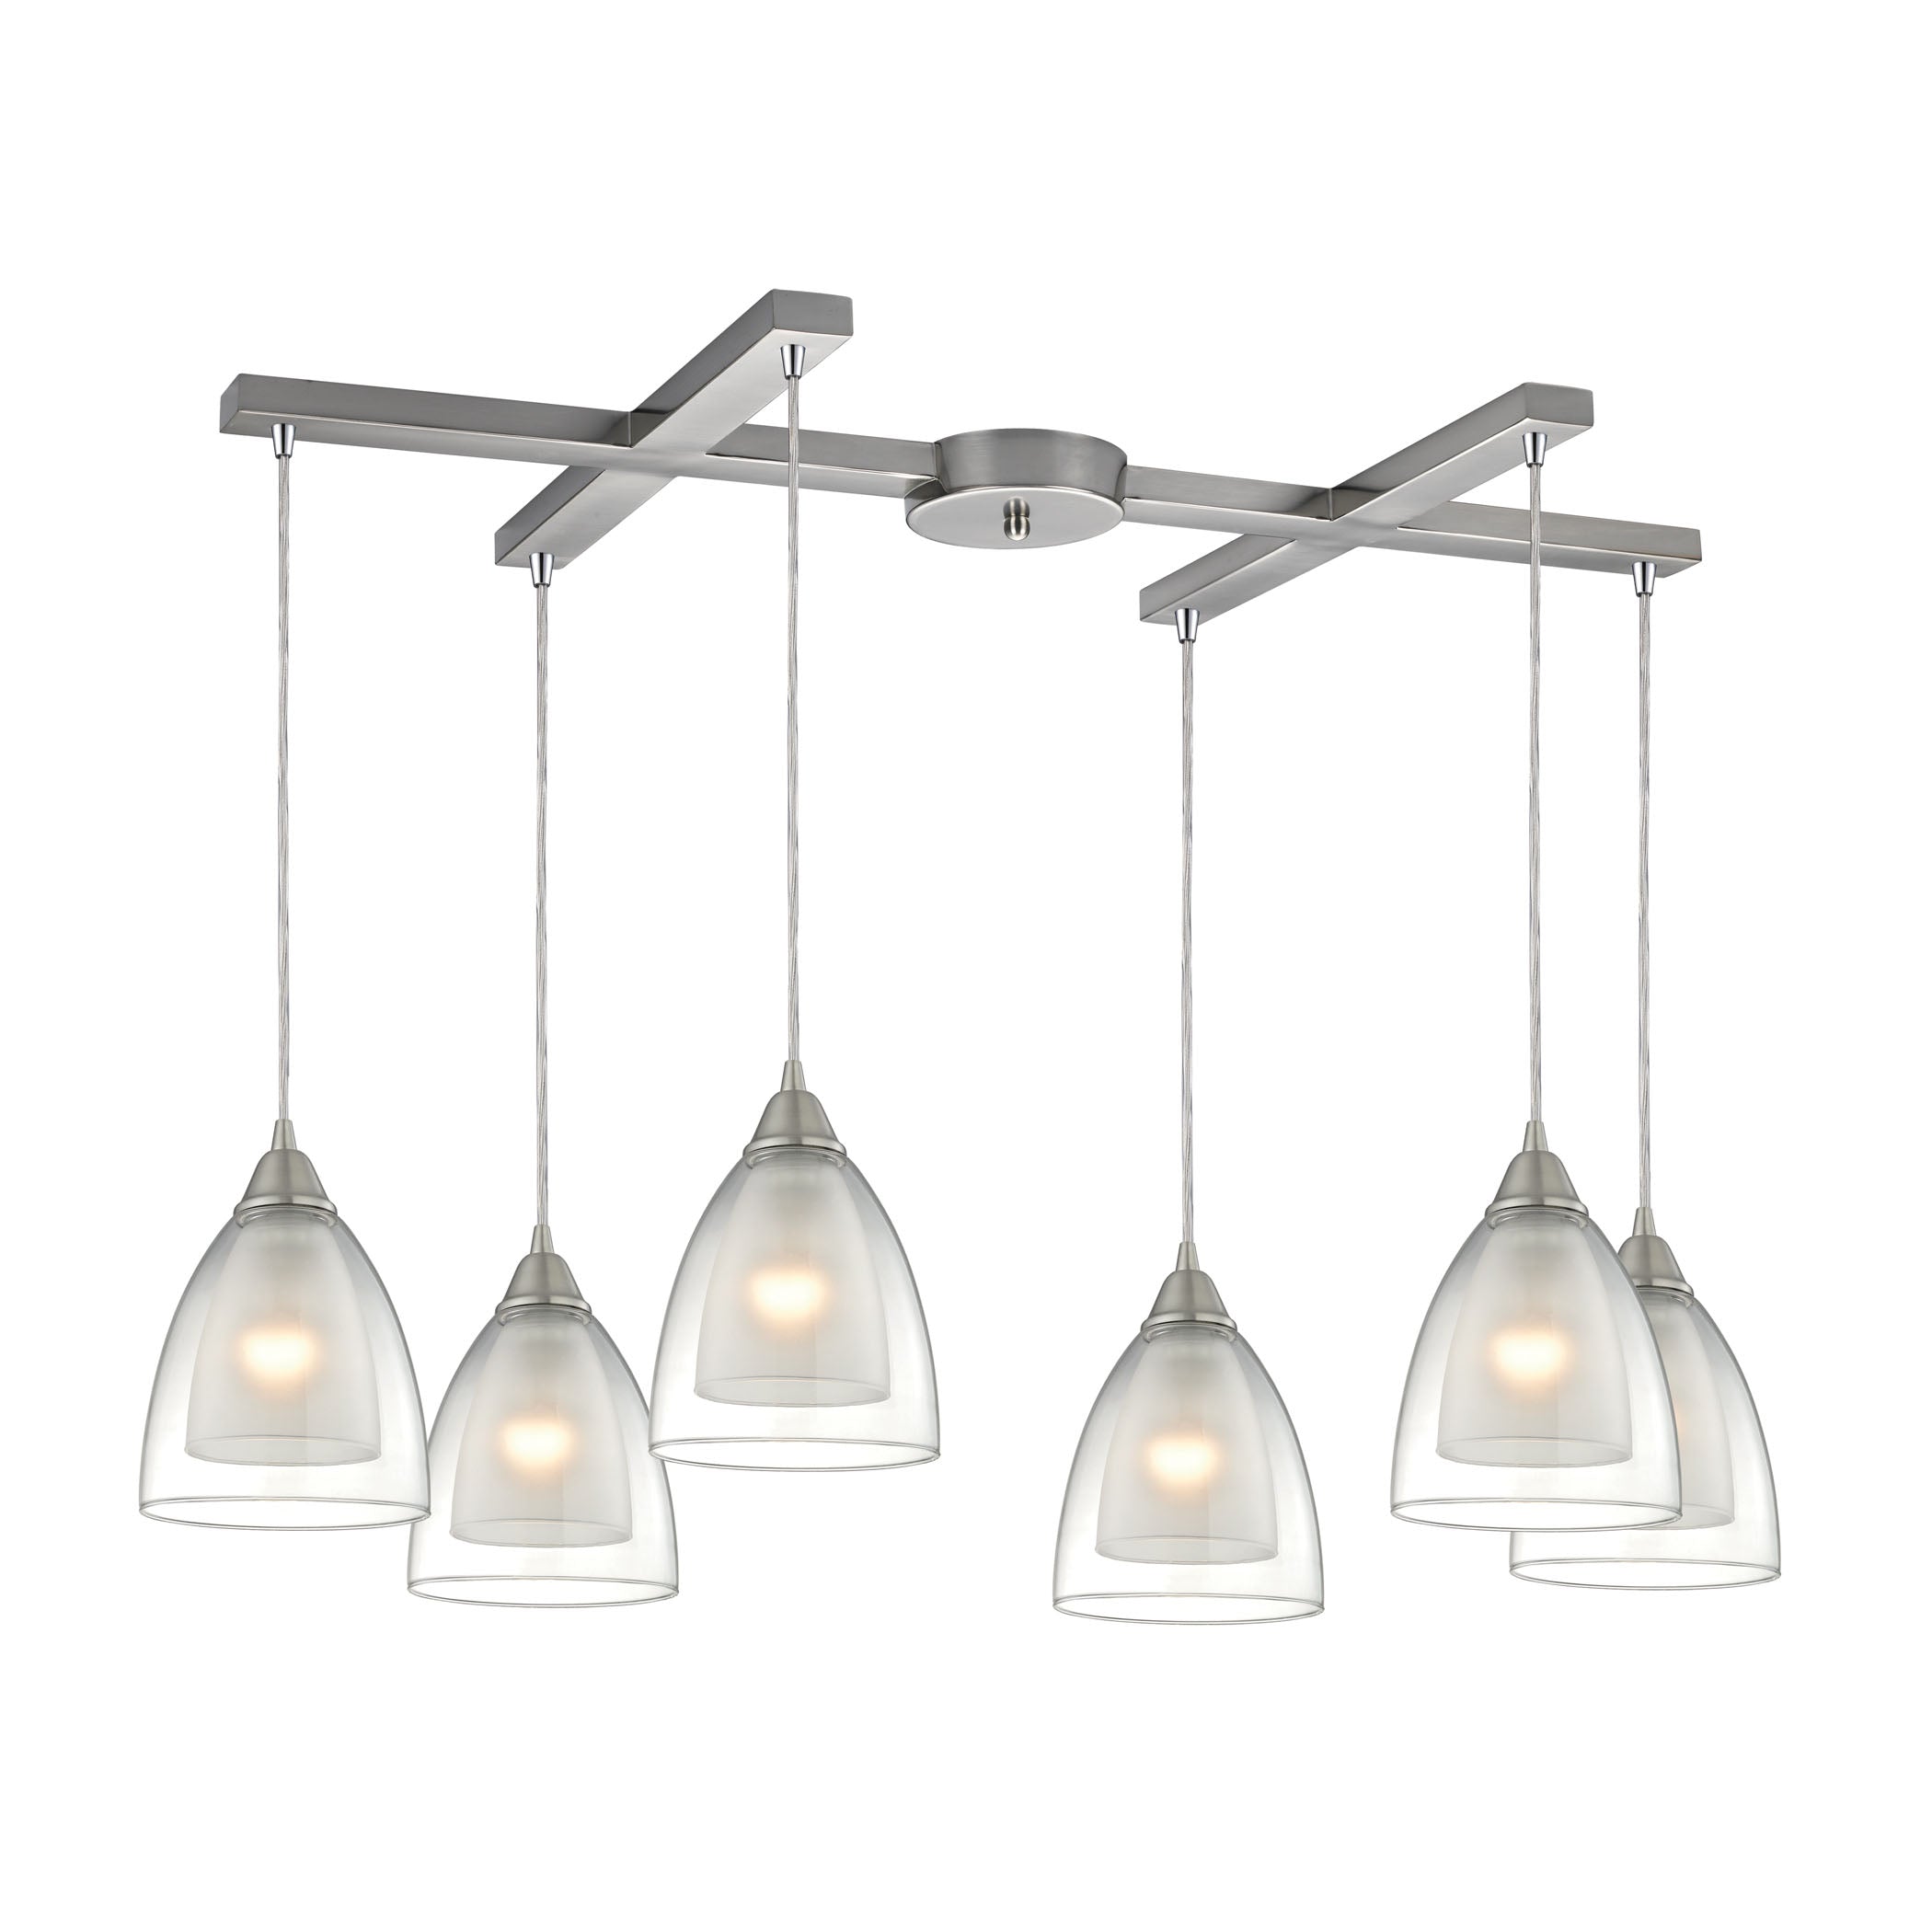 ELK Lighting 10464/6 Layers 6-Light H-Bar Pendant Fixture in Satin Nickel with Clear Glass